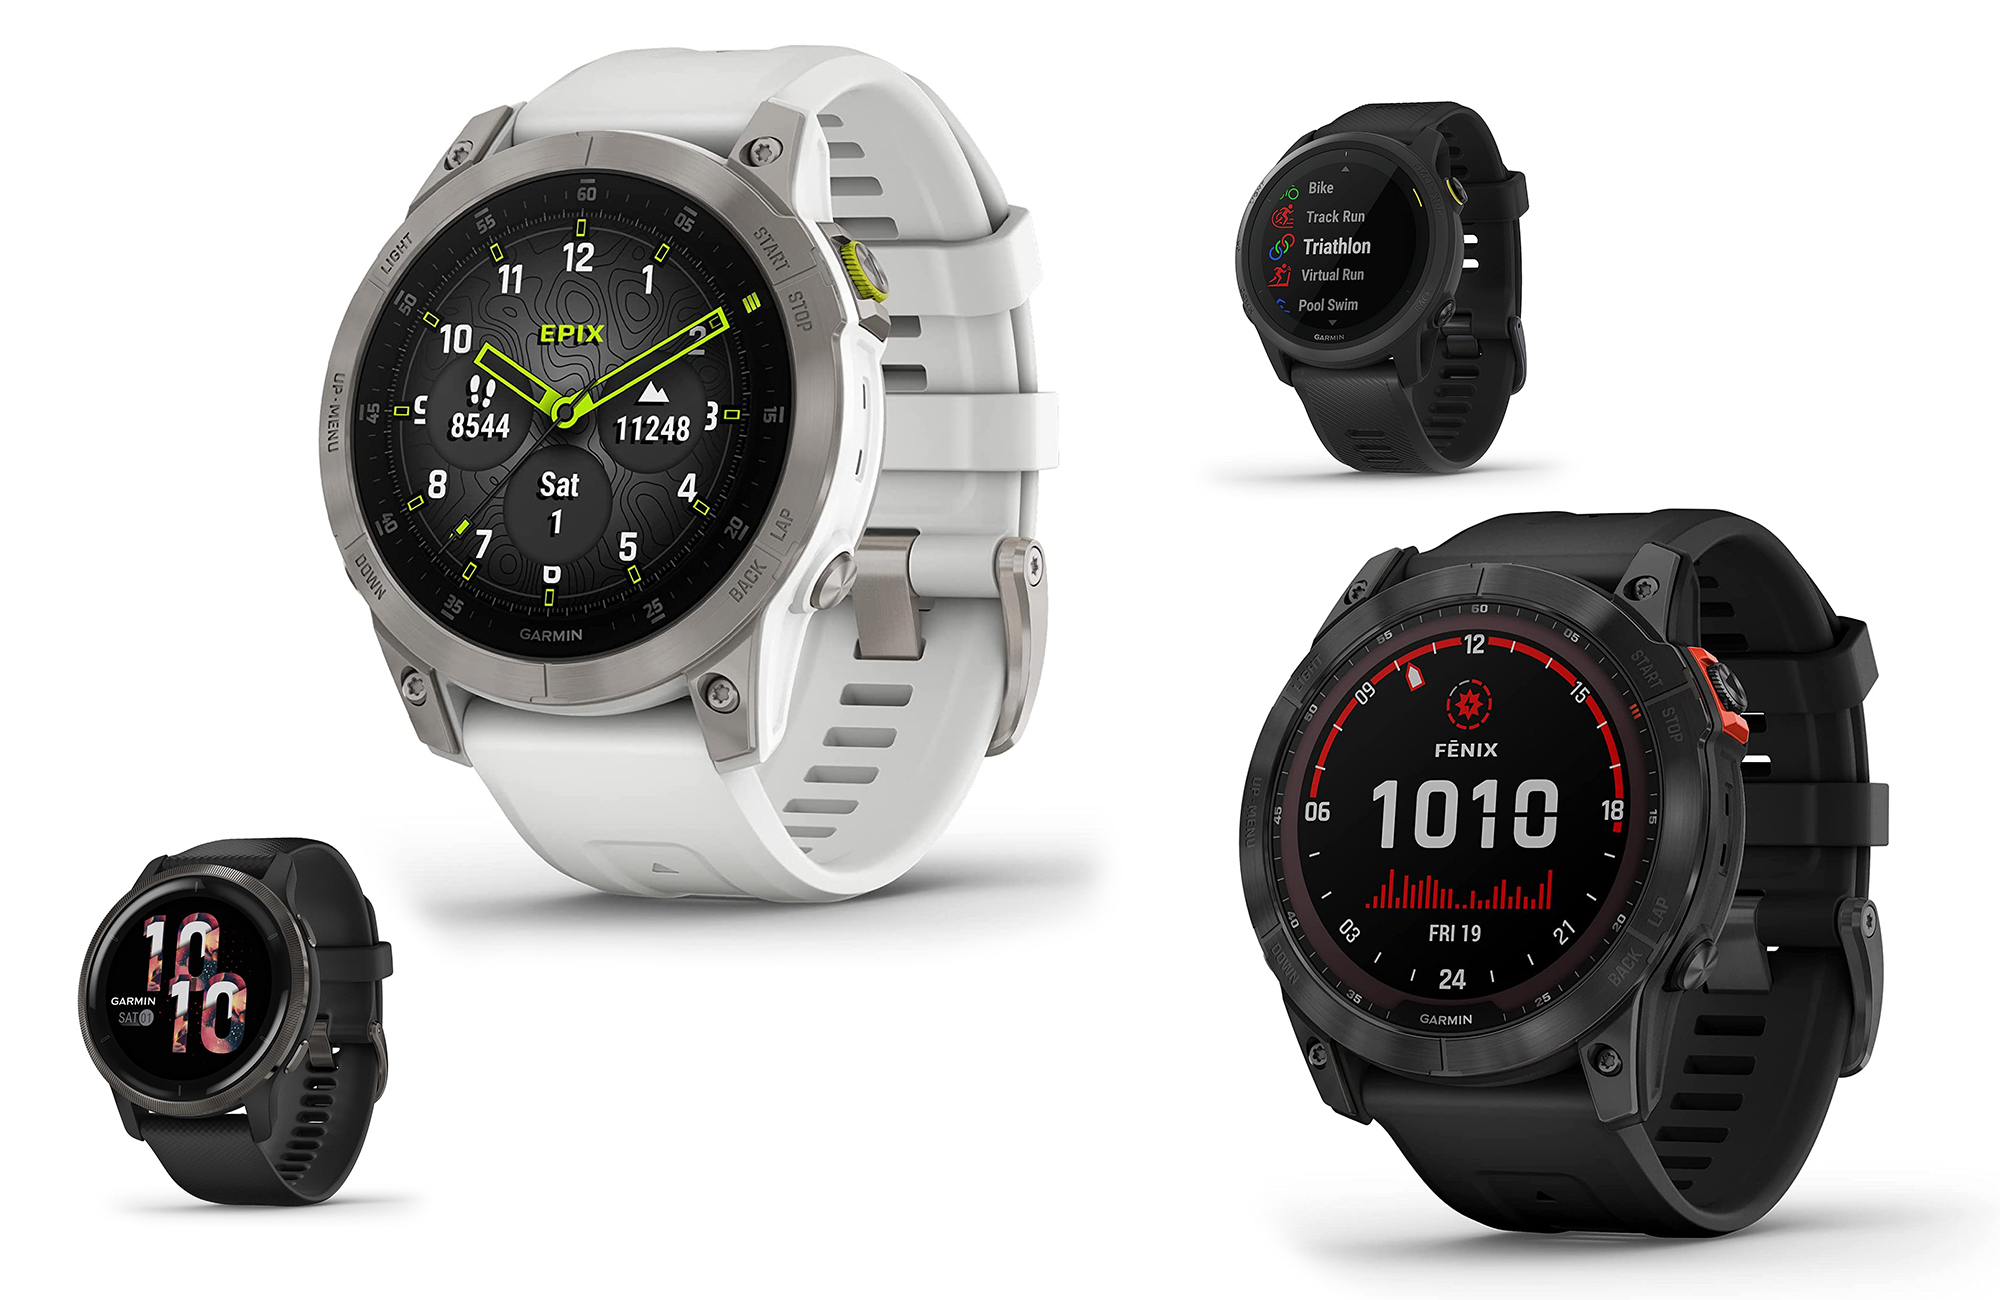 Save up to $300 on Garmin watches with these Prime Day deals